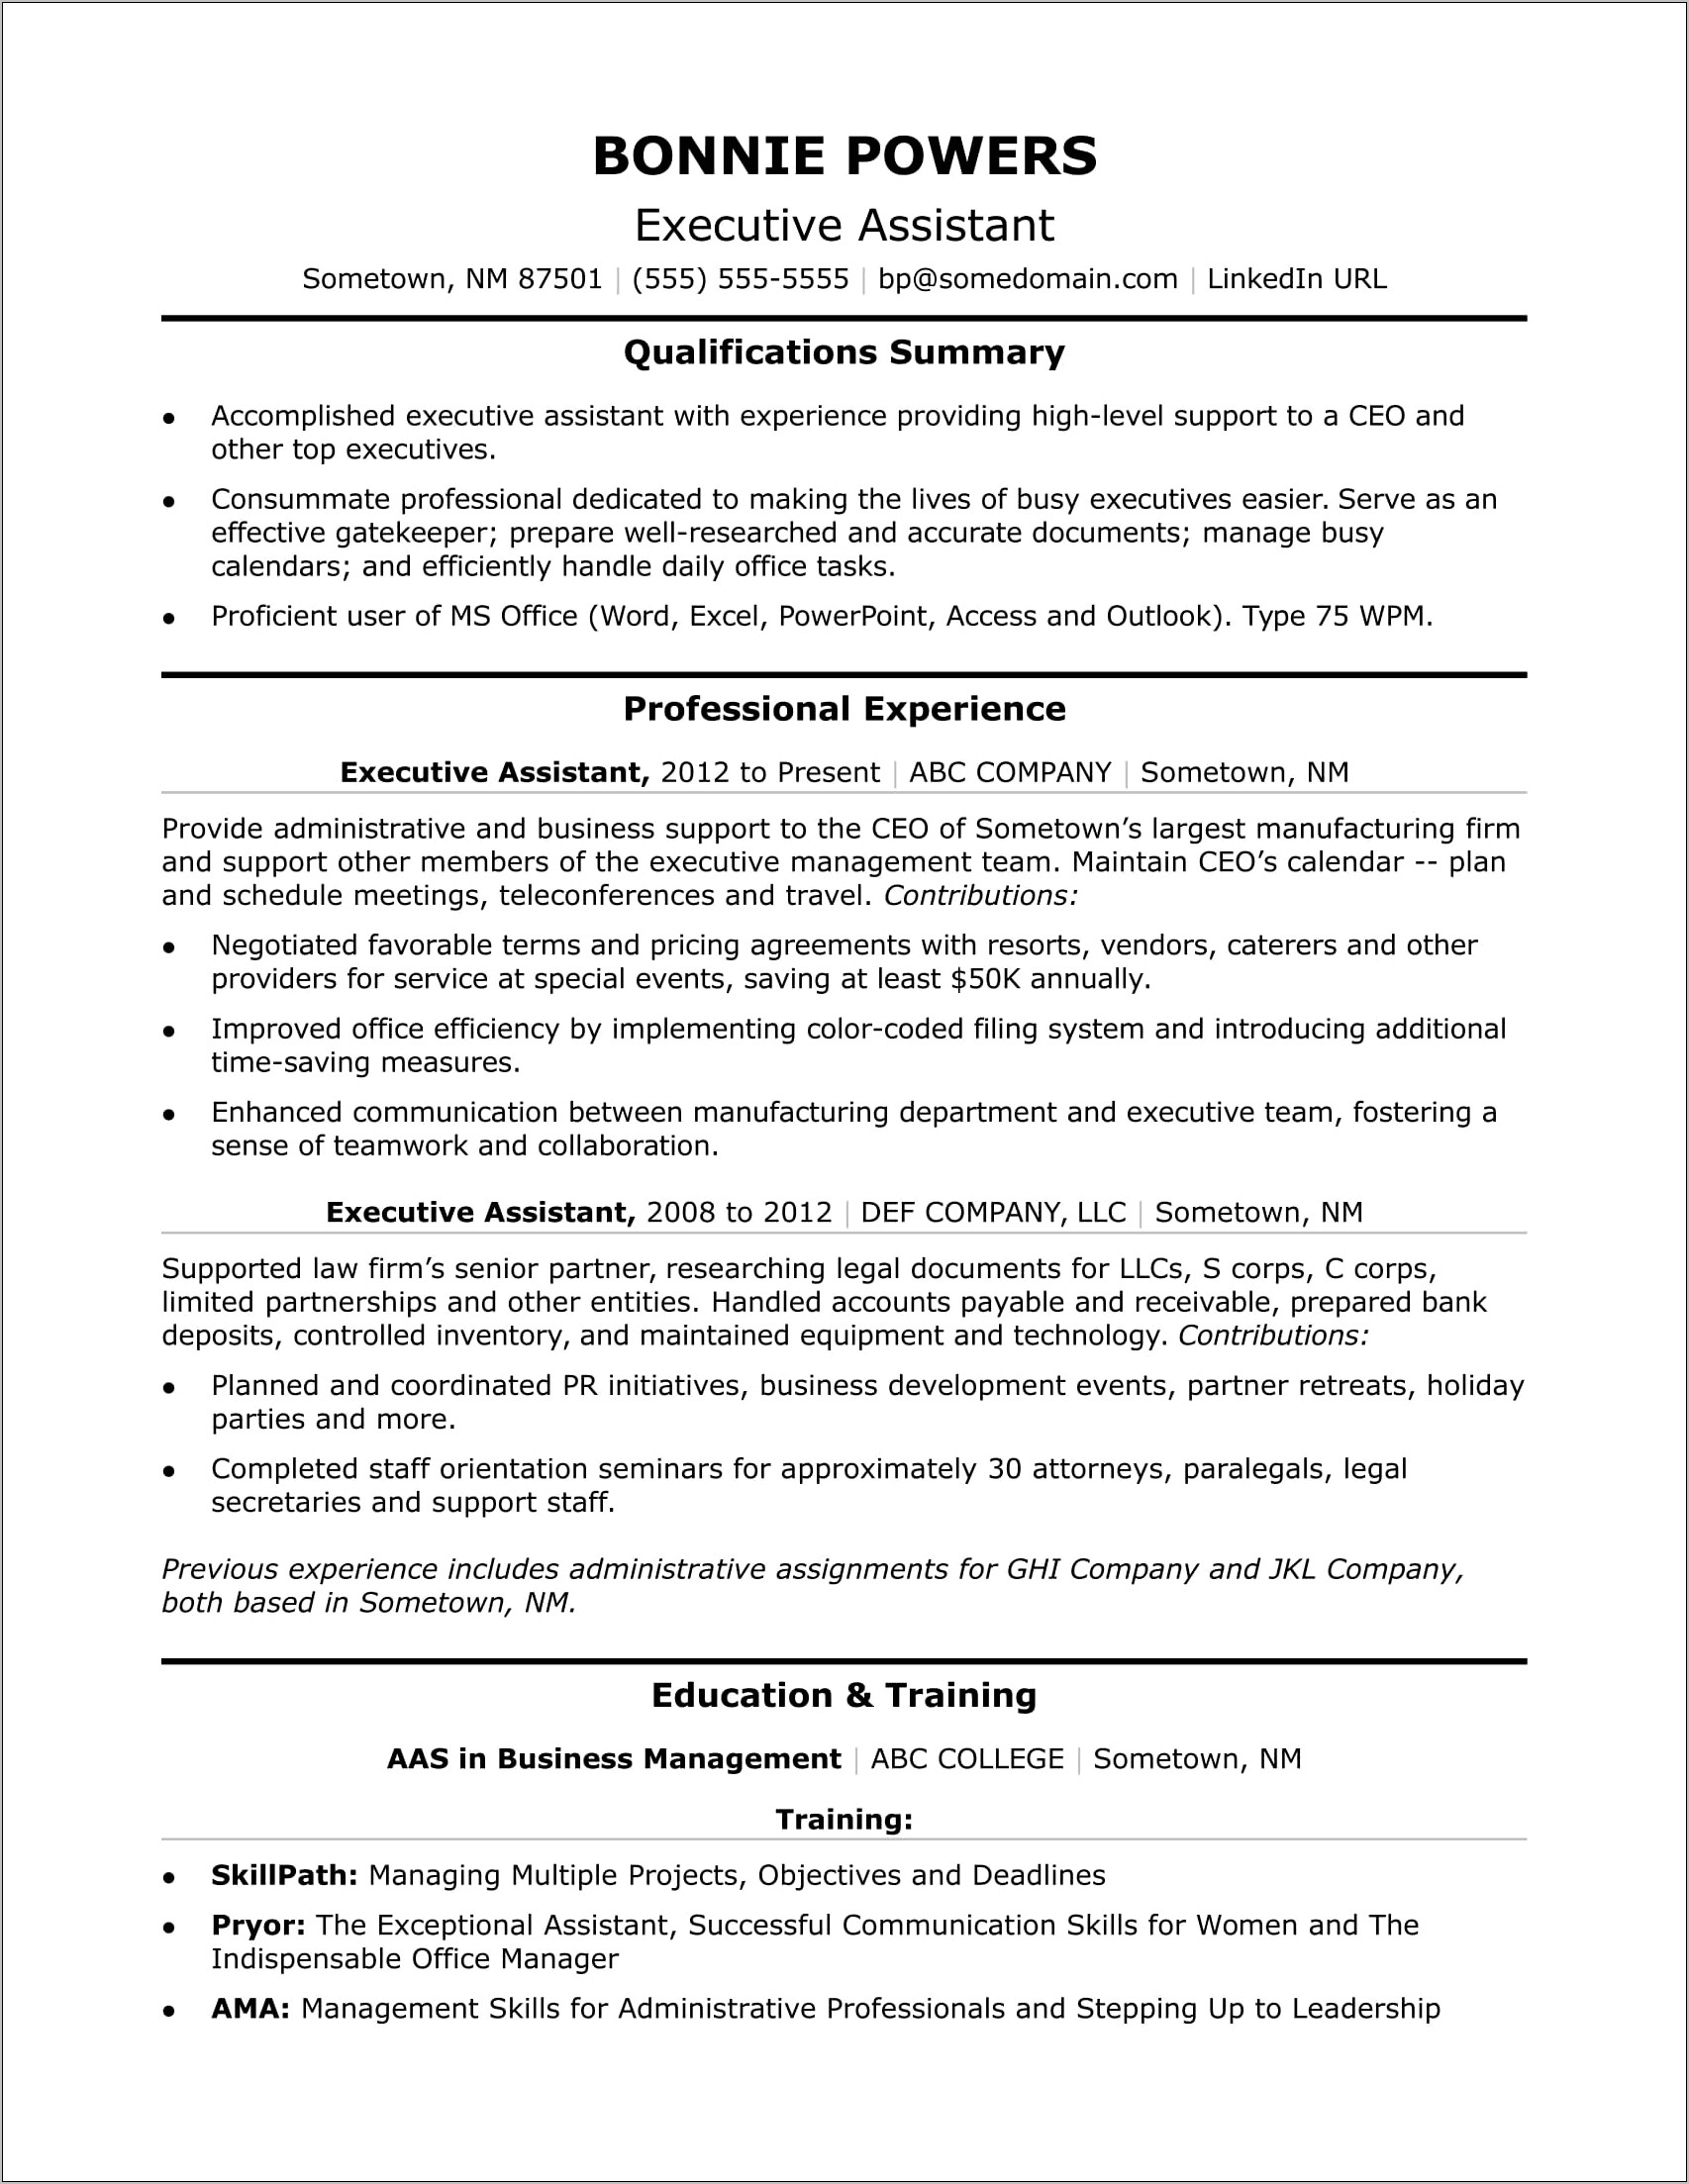 Eecutive Assistant Resume Example Areas Of Expertise